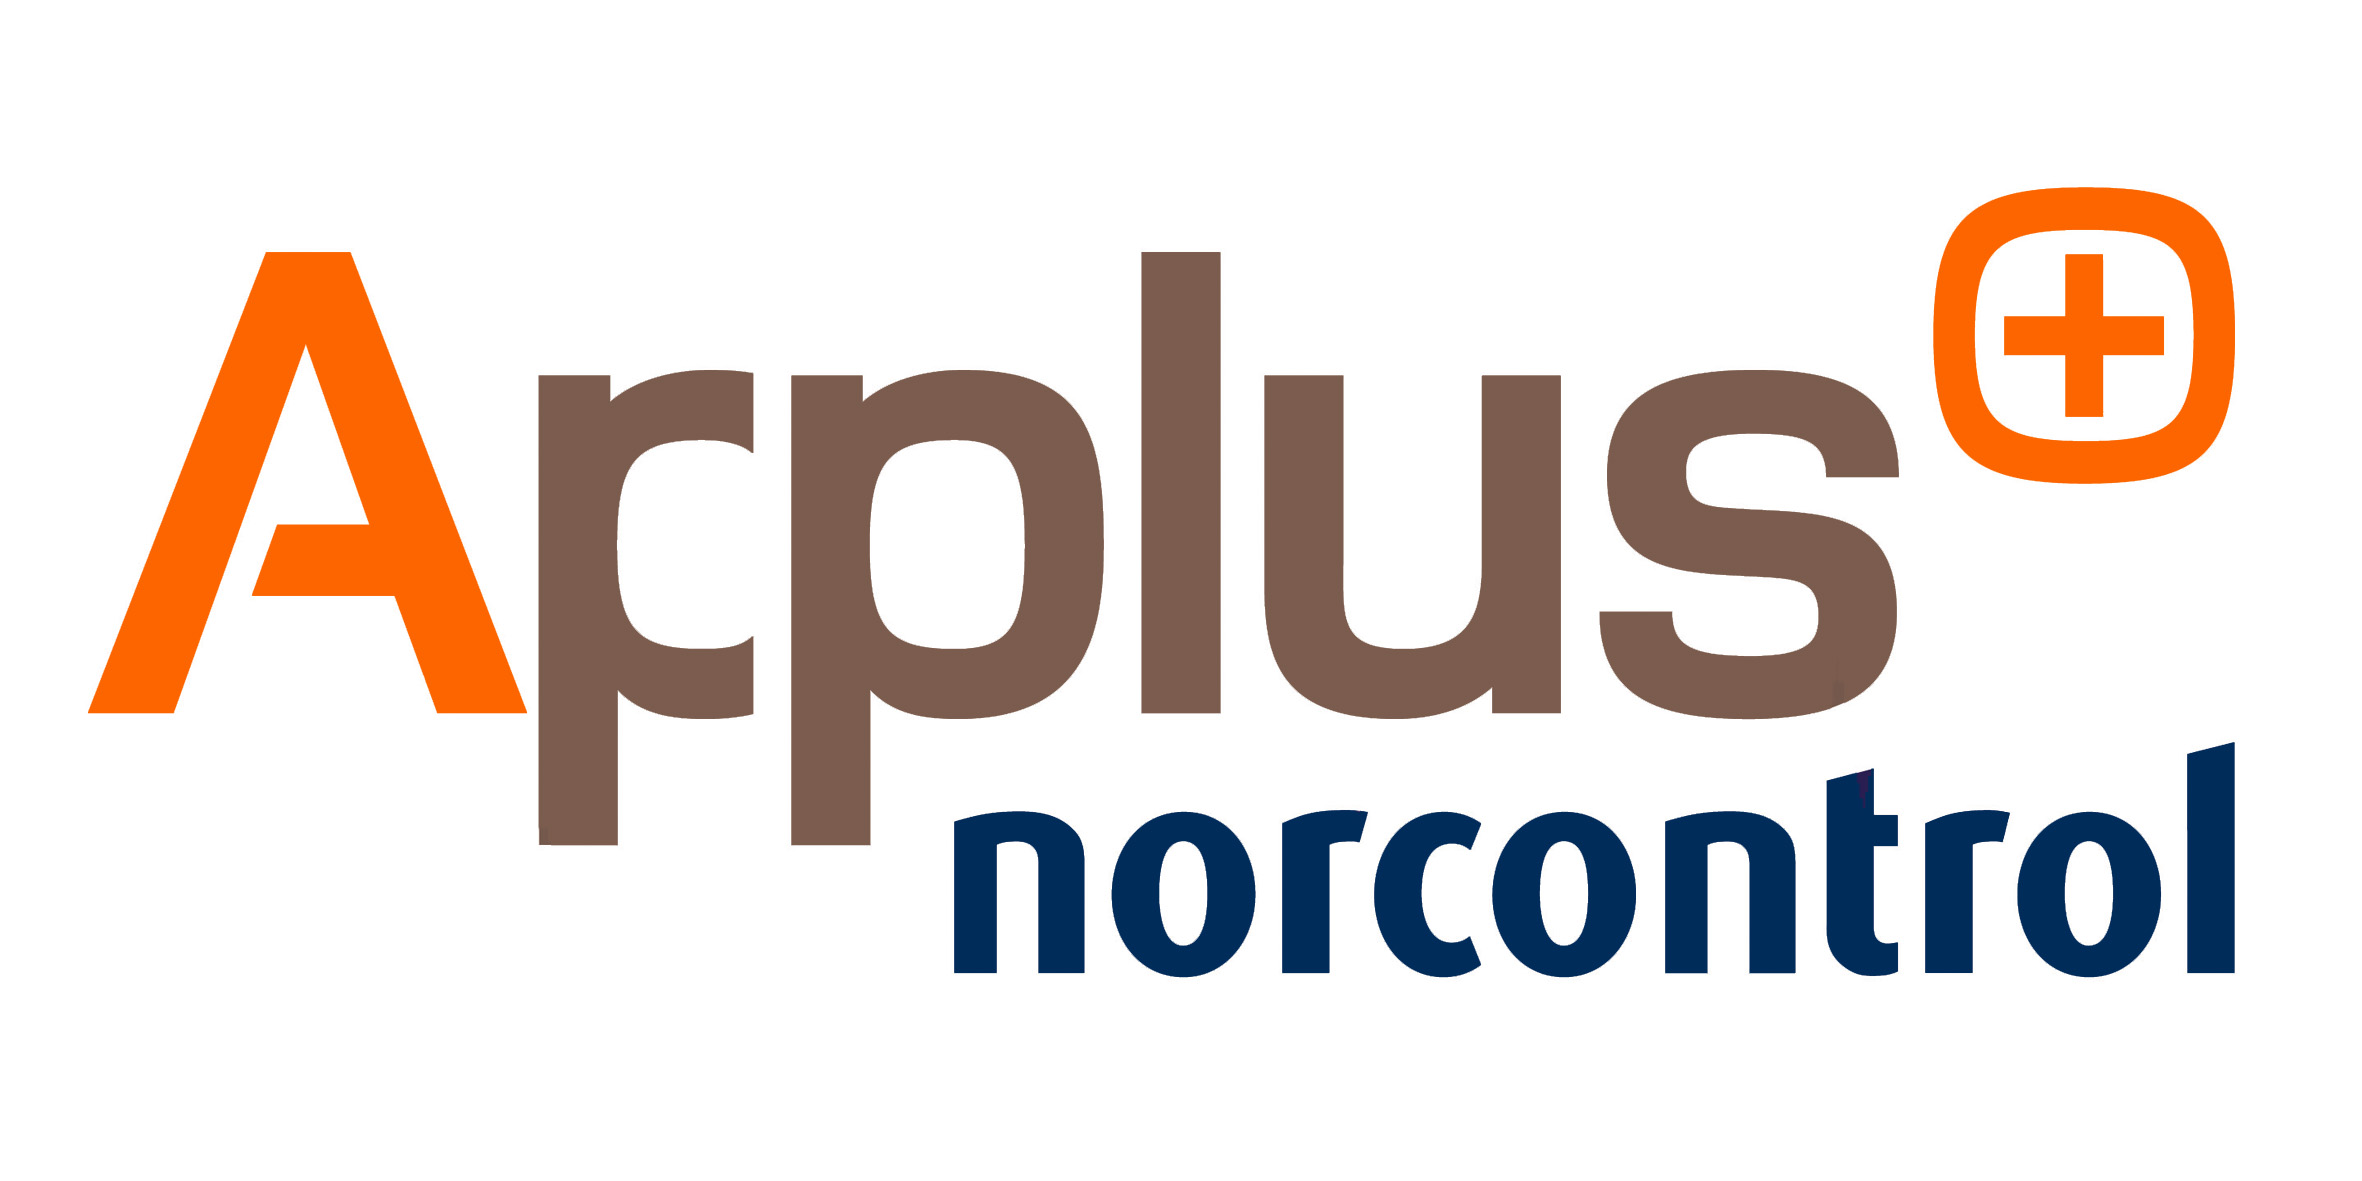 Applus Norcontrol Gets A New Enac Accreditation (Oc I/221) For The Wheels Loaders Inspection | Applus Norcontrol - Applus, Transparent background PNG HD thumbnail